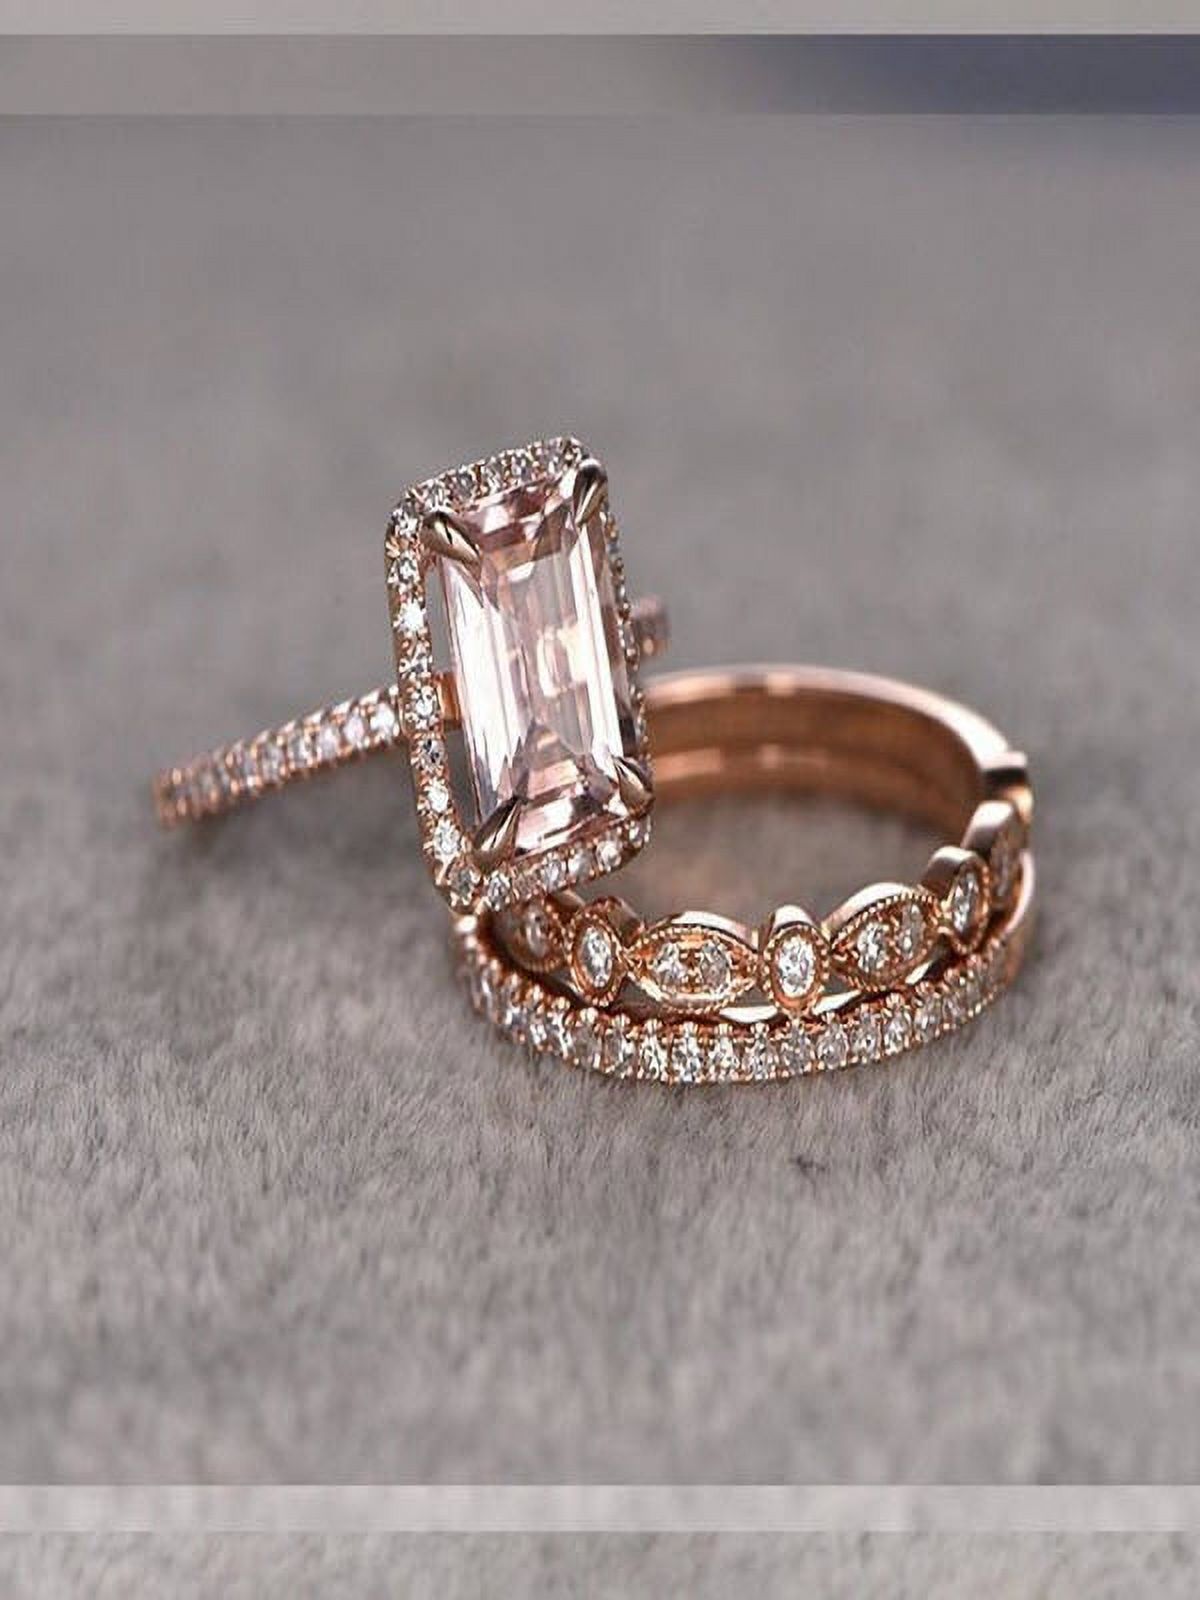 Limited Time Sale 2 Carat Morganite And Diamond Moissanite Trio Ring Set In 10K Rose Gold With One Engagement Ring And 2 Wedding Bands - image 2 of 2